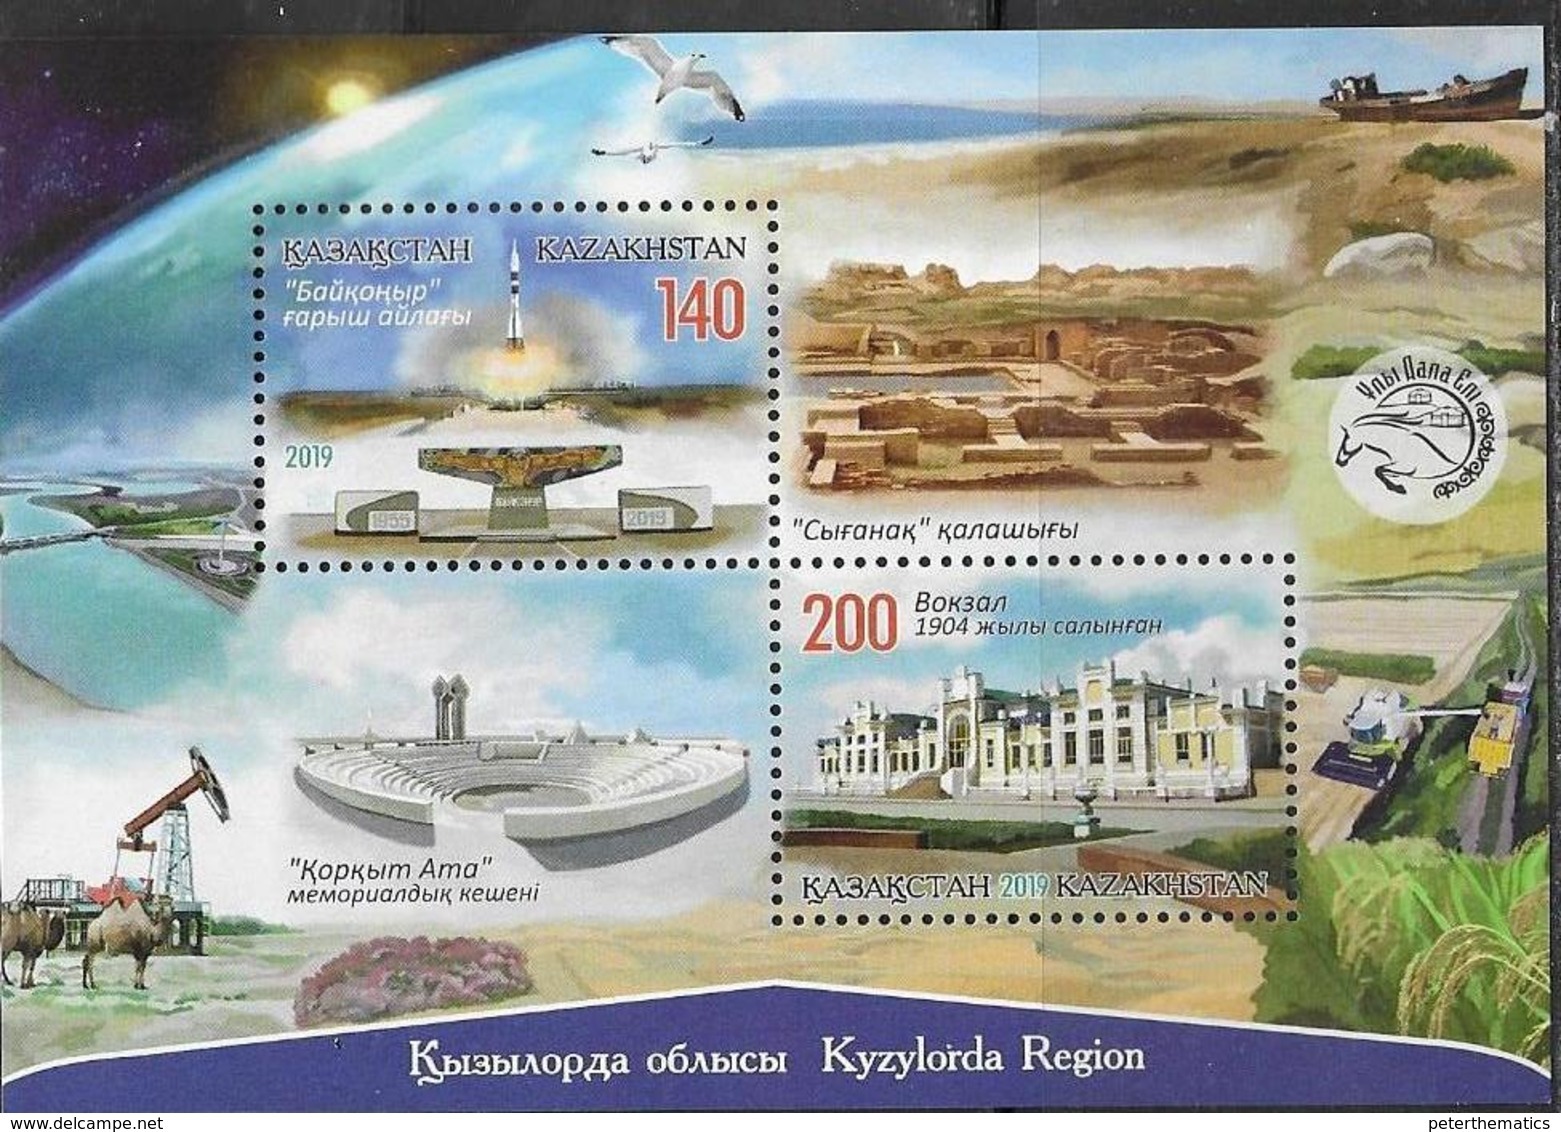 KAZAKHSTAN, 2019, MNH , KYZYLORDA REGION, SPACE, ARCHITECTURE, ANCIENT RUINS, SHIPS, AGRICULTURE,  SHEETLET - Asie